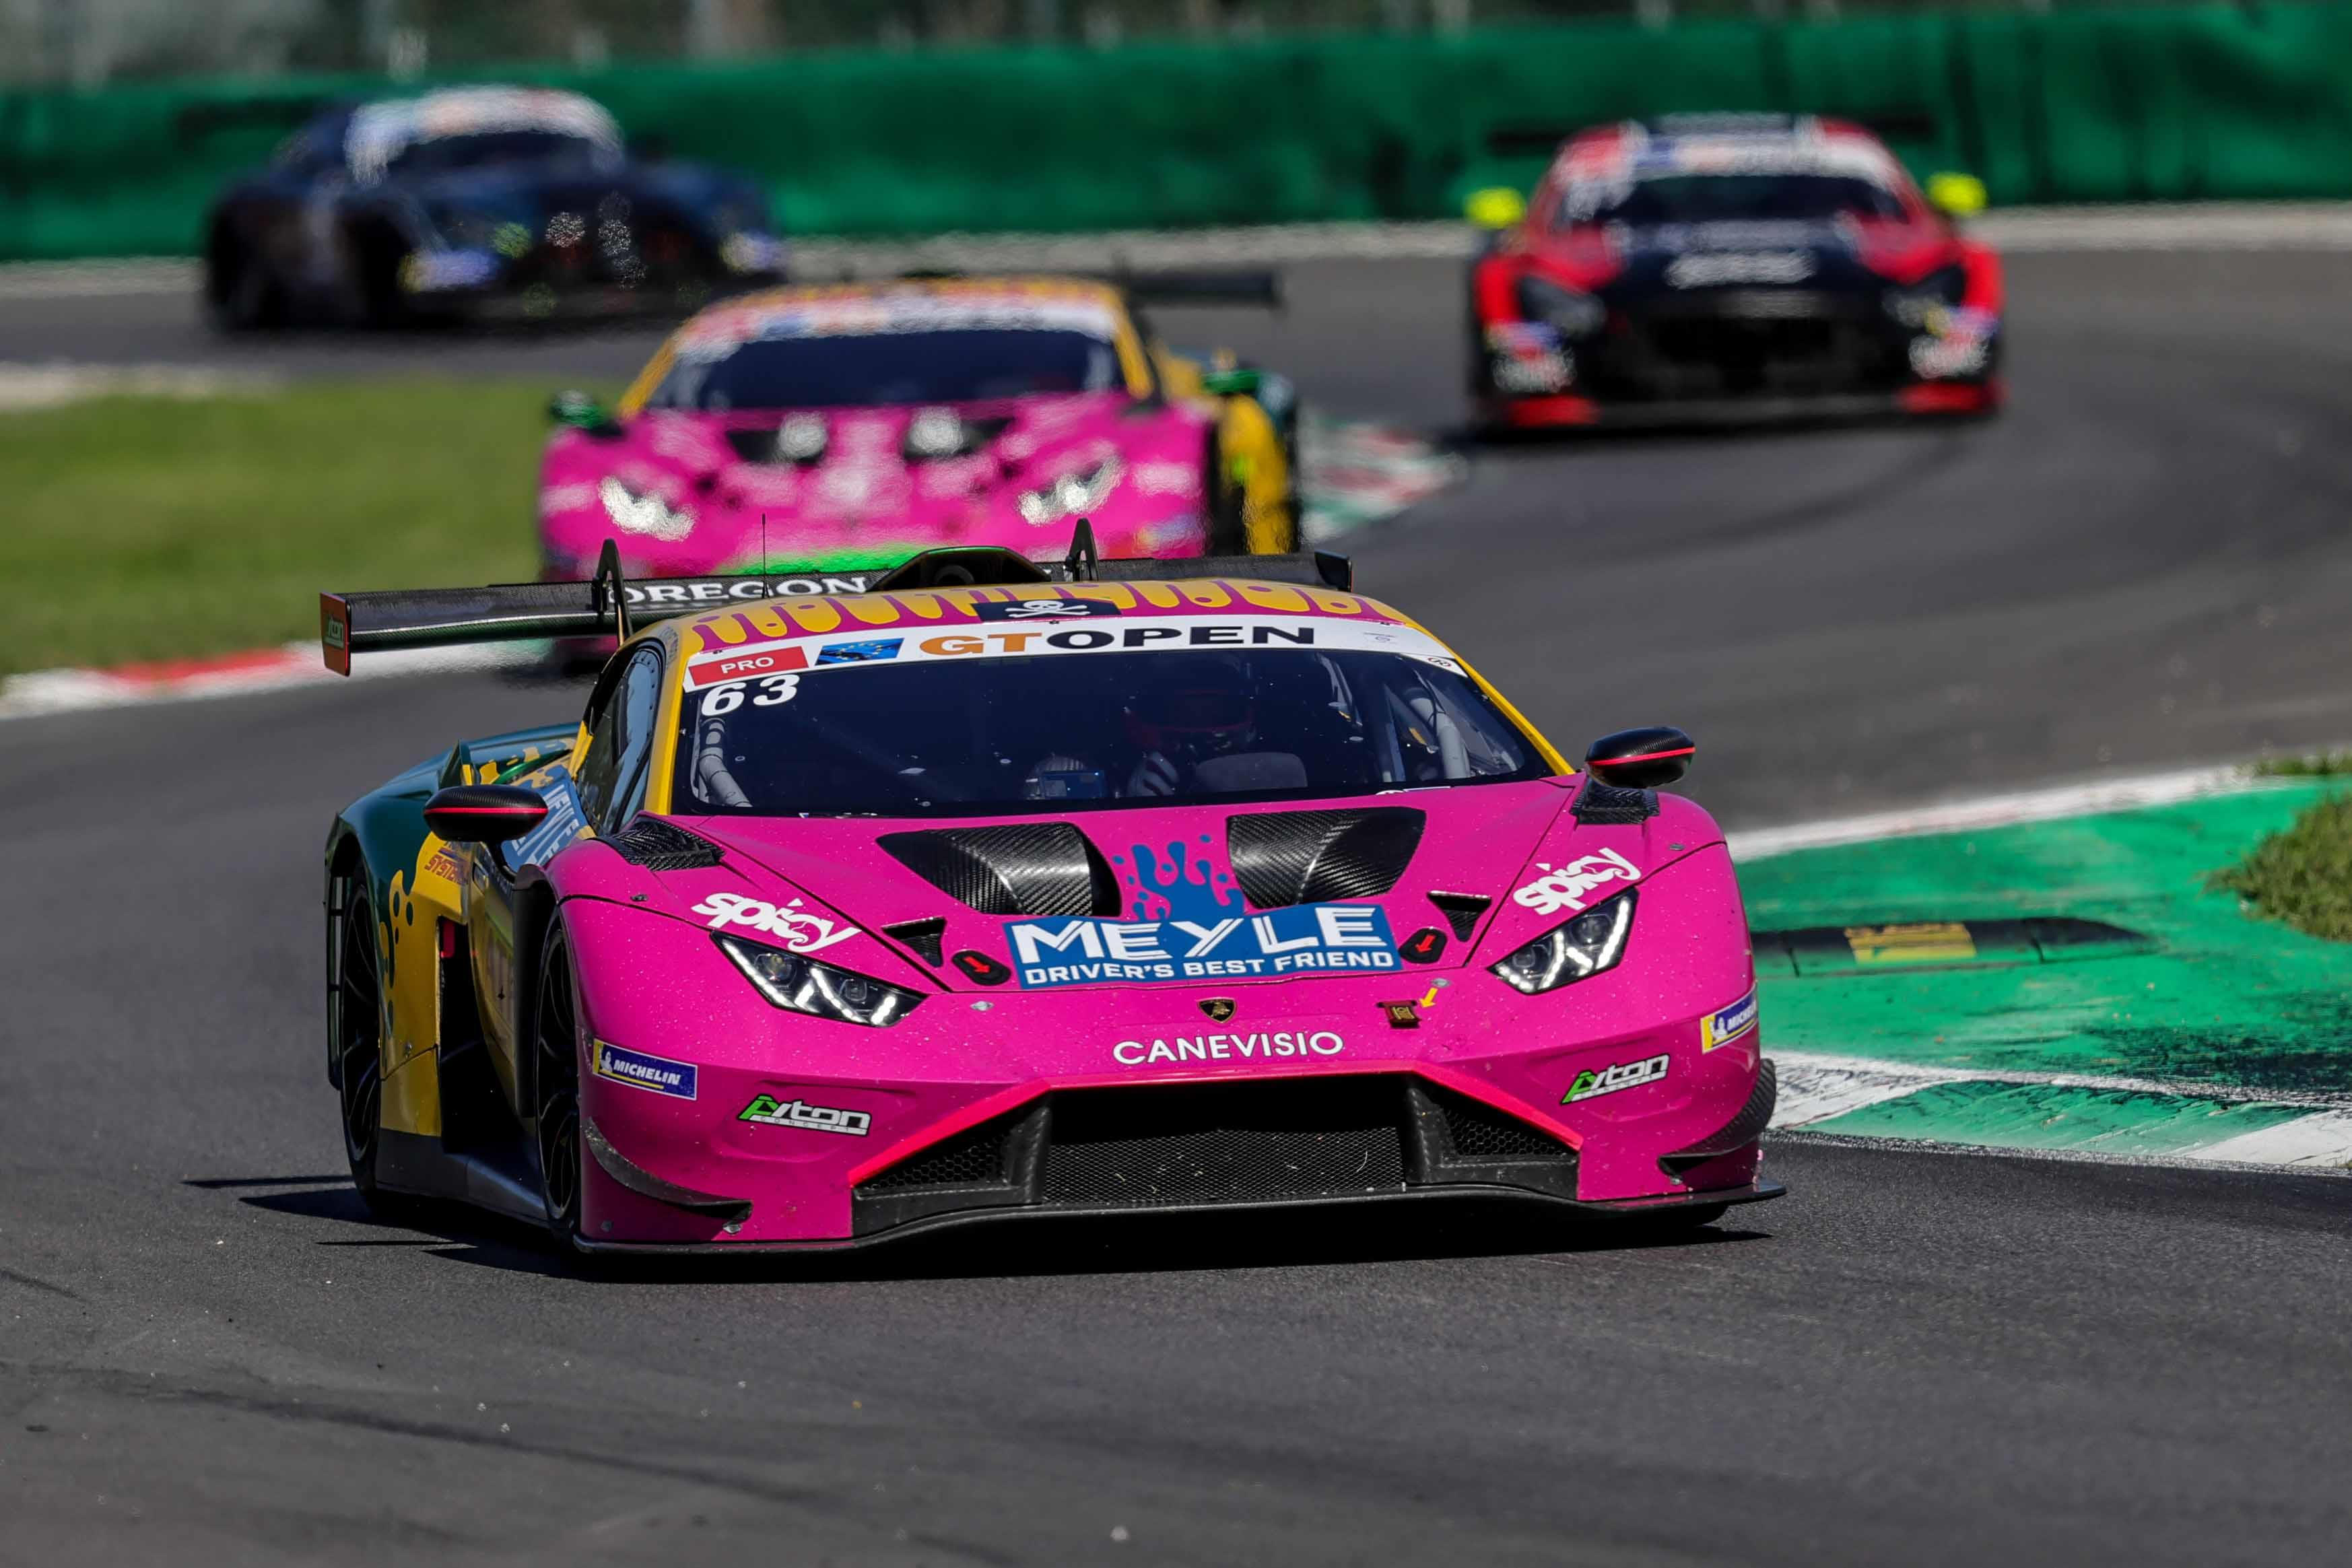 Lamborghini takes fourth GT Open victory of the season with - Paul and Chovet at Monza